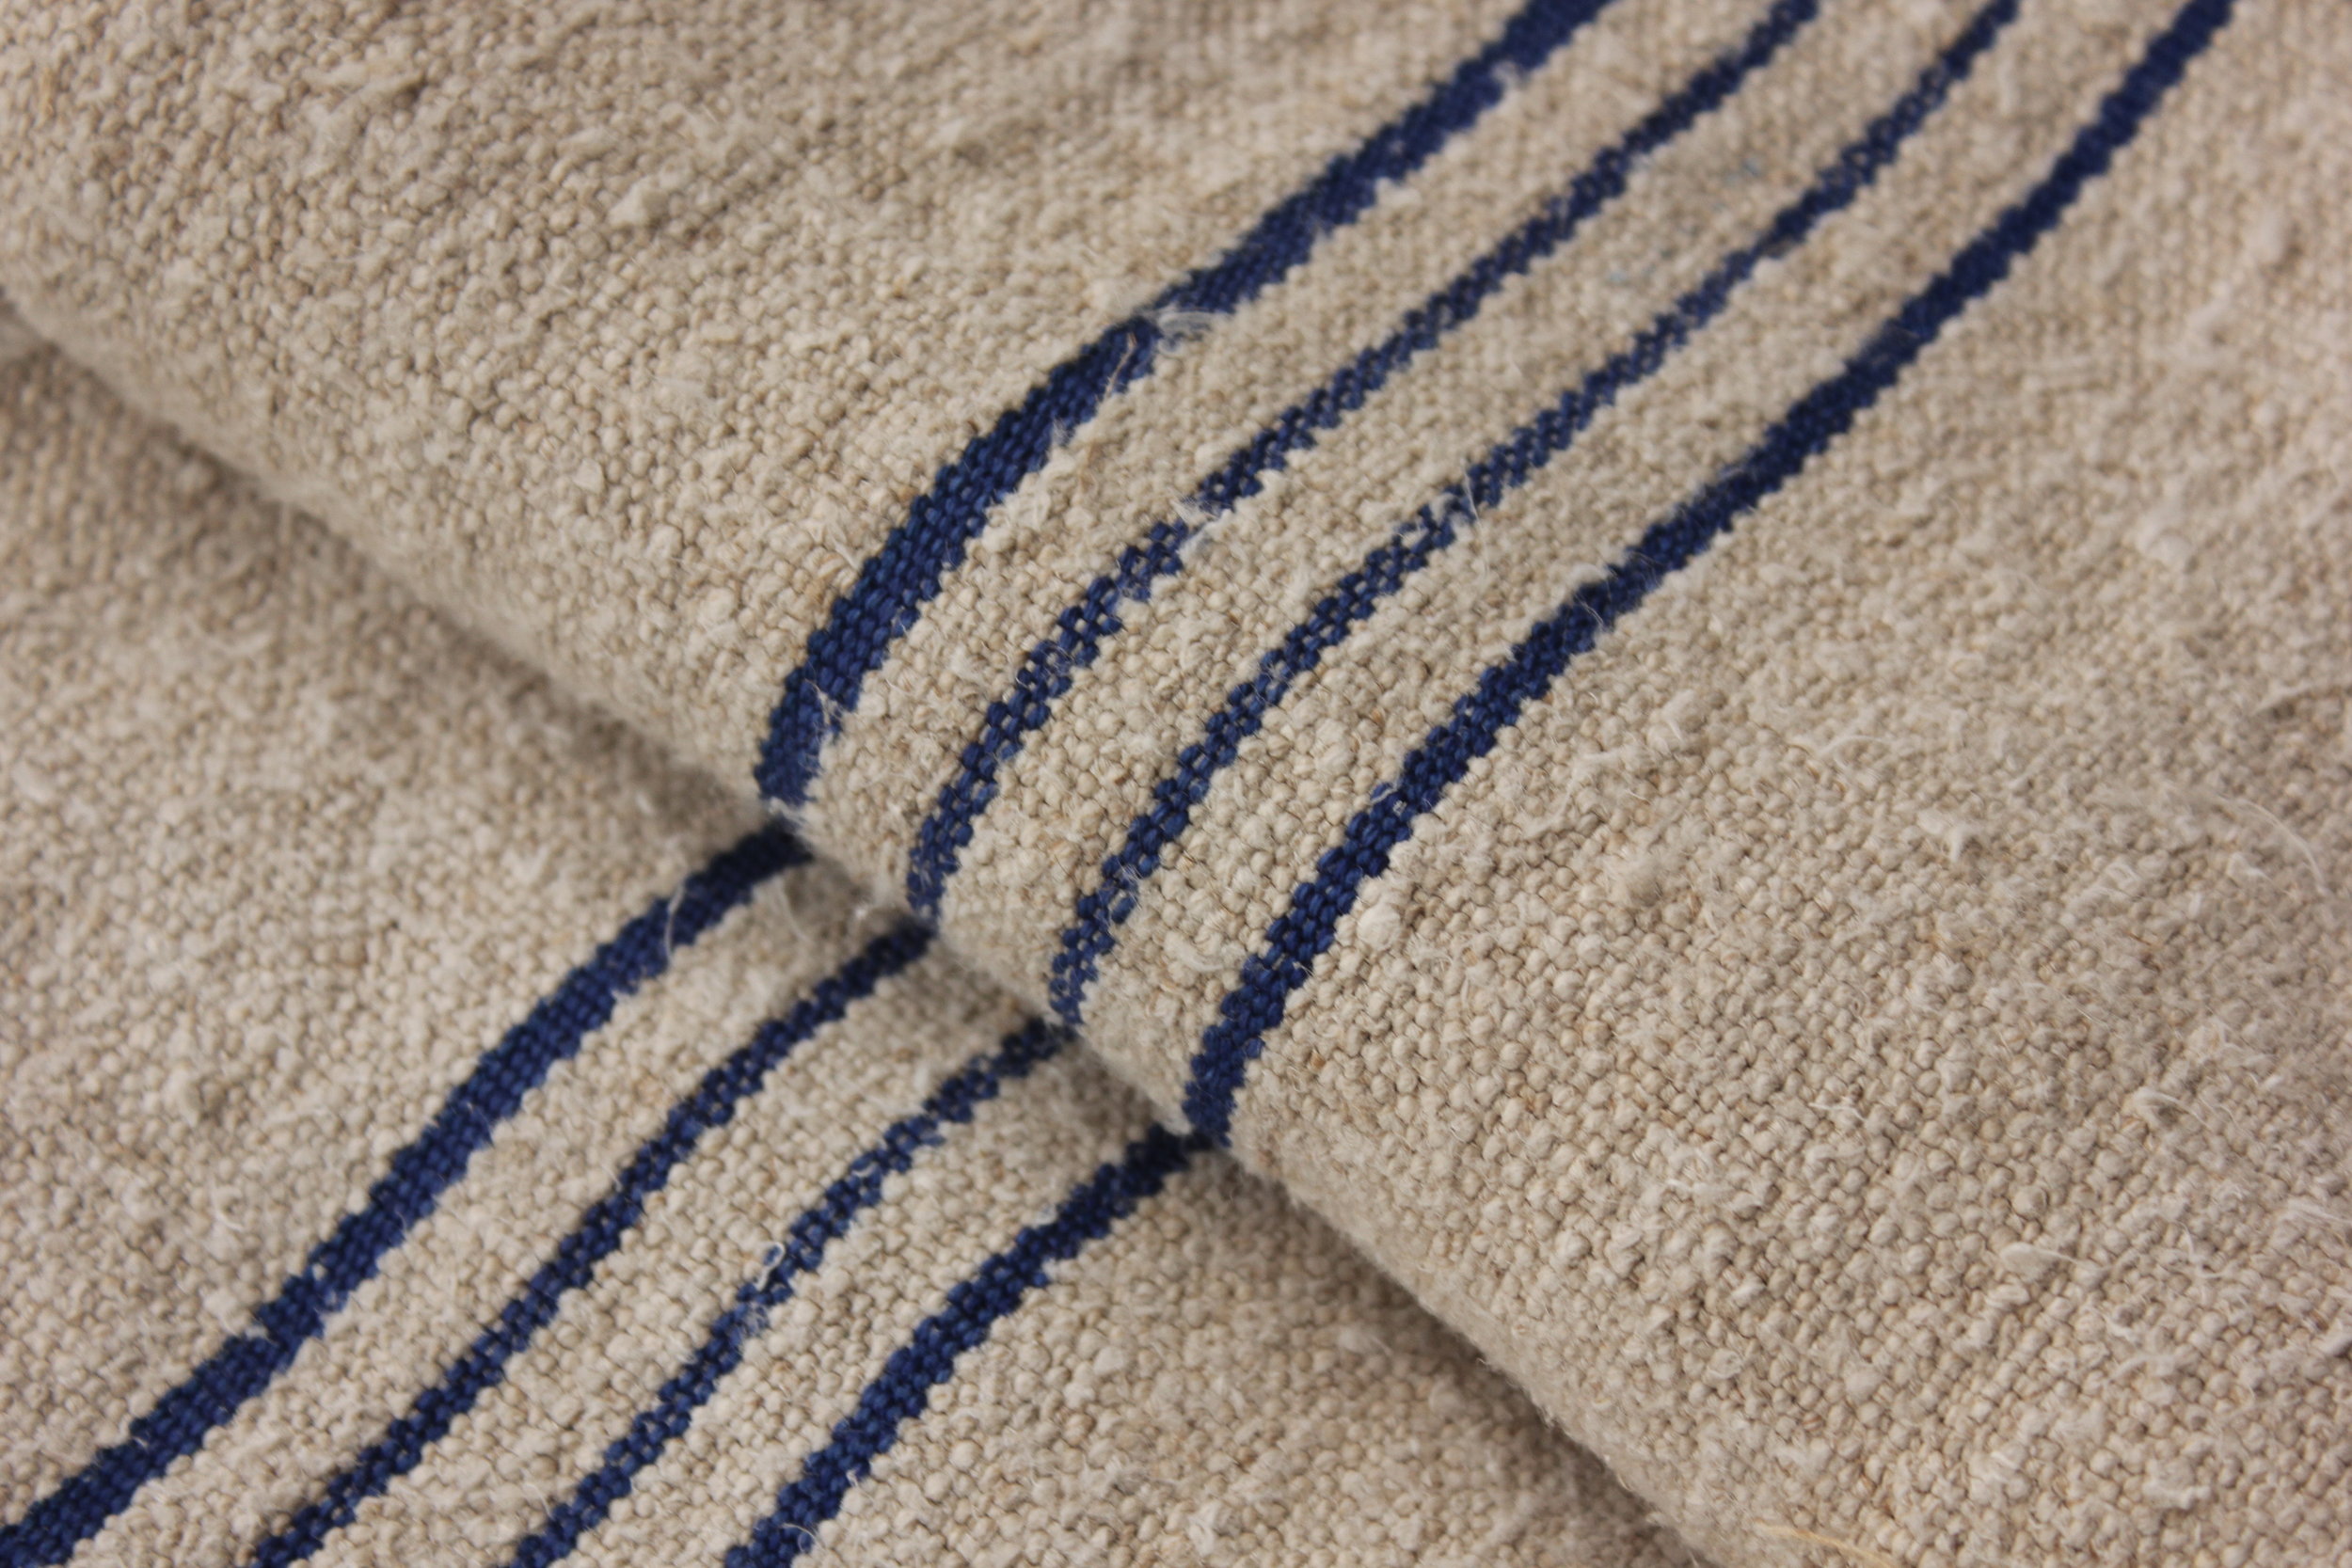 Details about   Vintage GRAIN SACK fabric material linen red blue 2.85 YDS old upholstery washed 